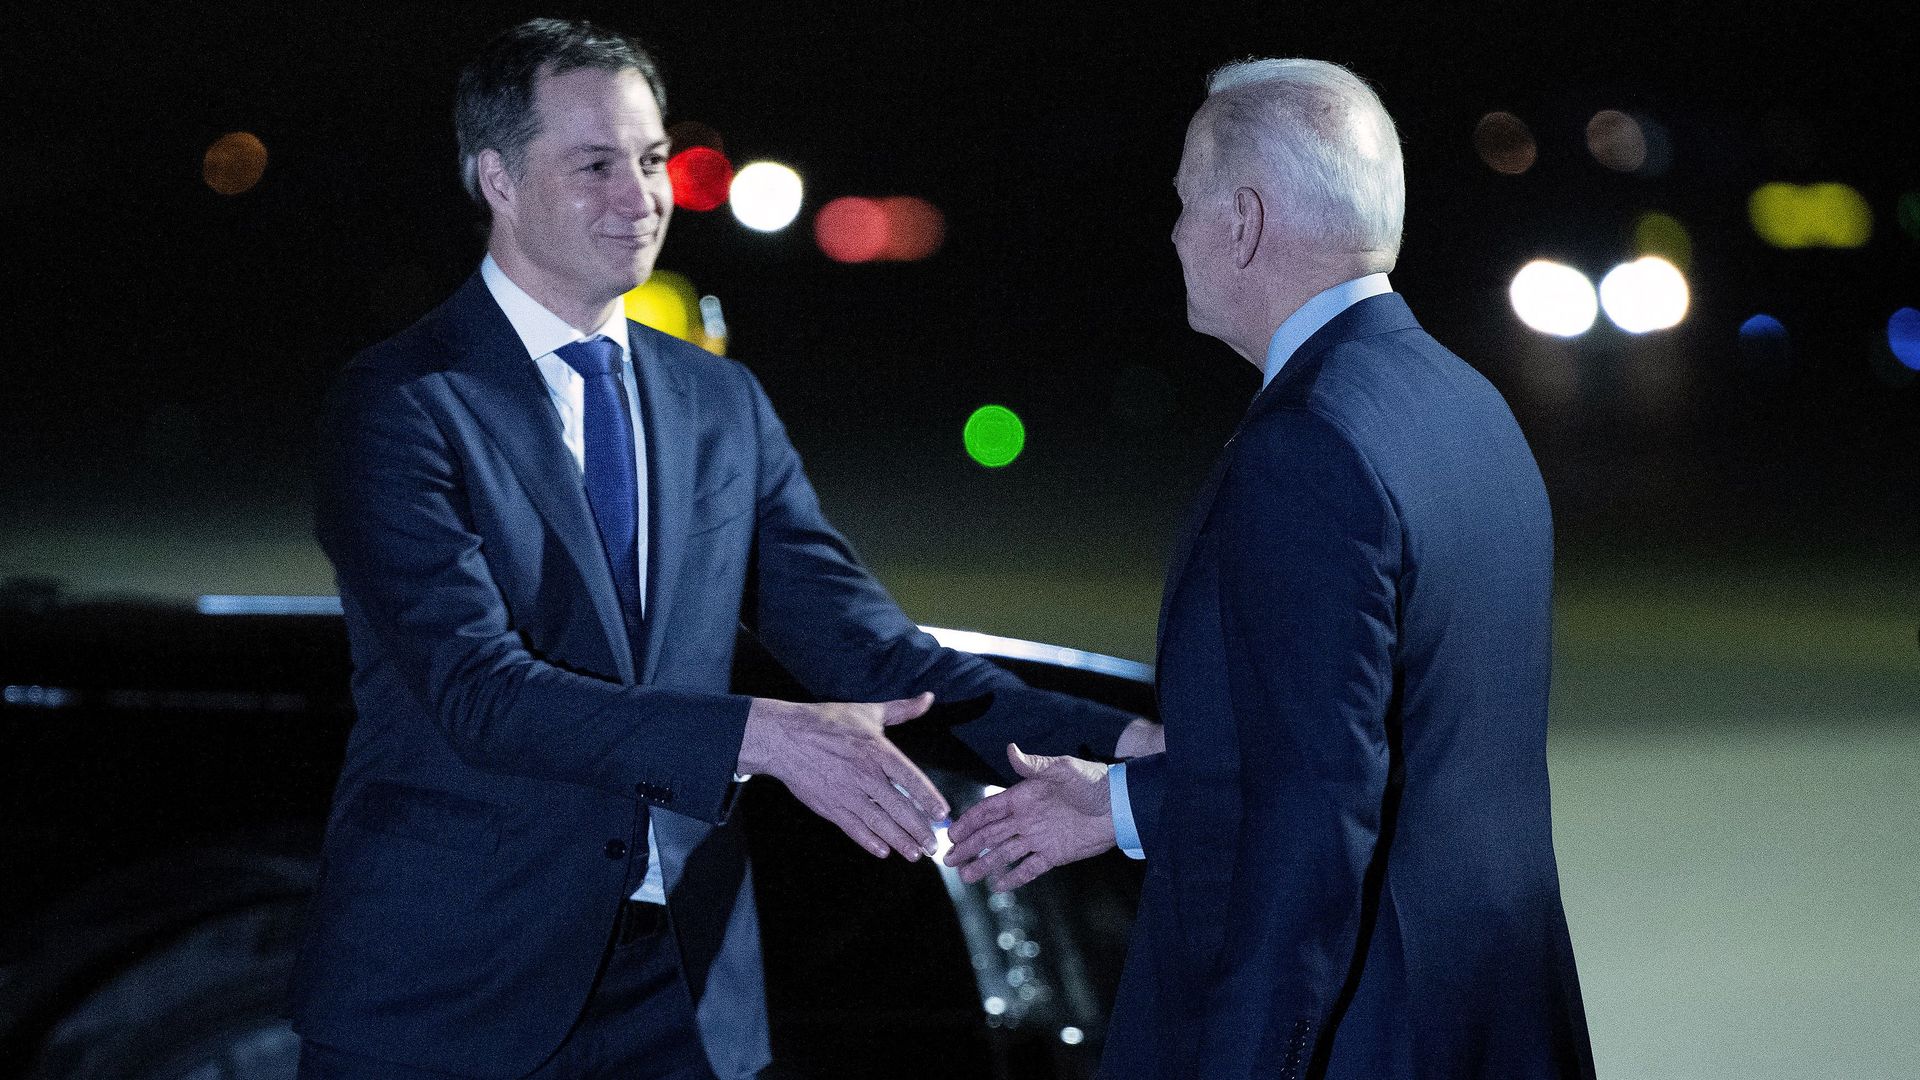 President Biden is seen shaking hands with Belgium's prime minister upon arriving for a NATO meeting.